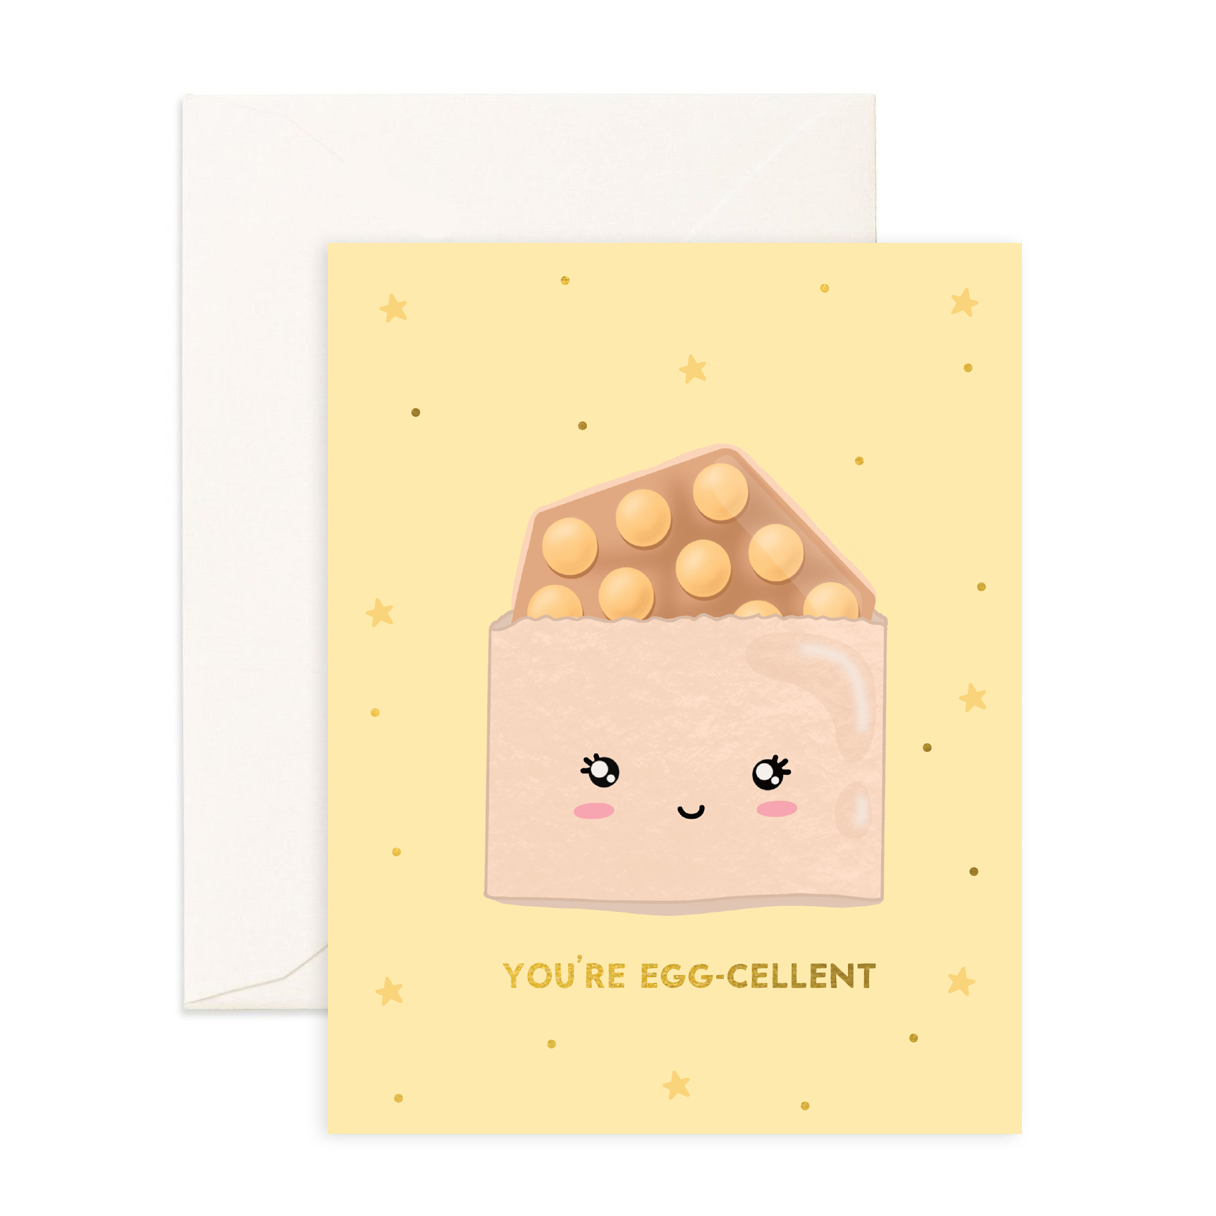 You're EGG-cellent- Greeting Card